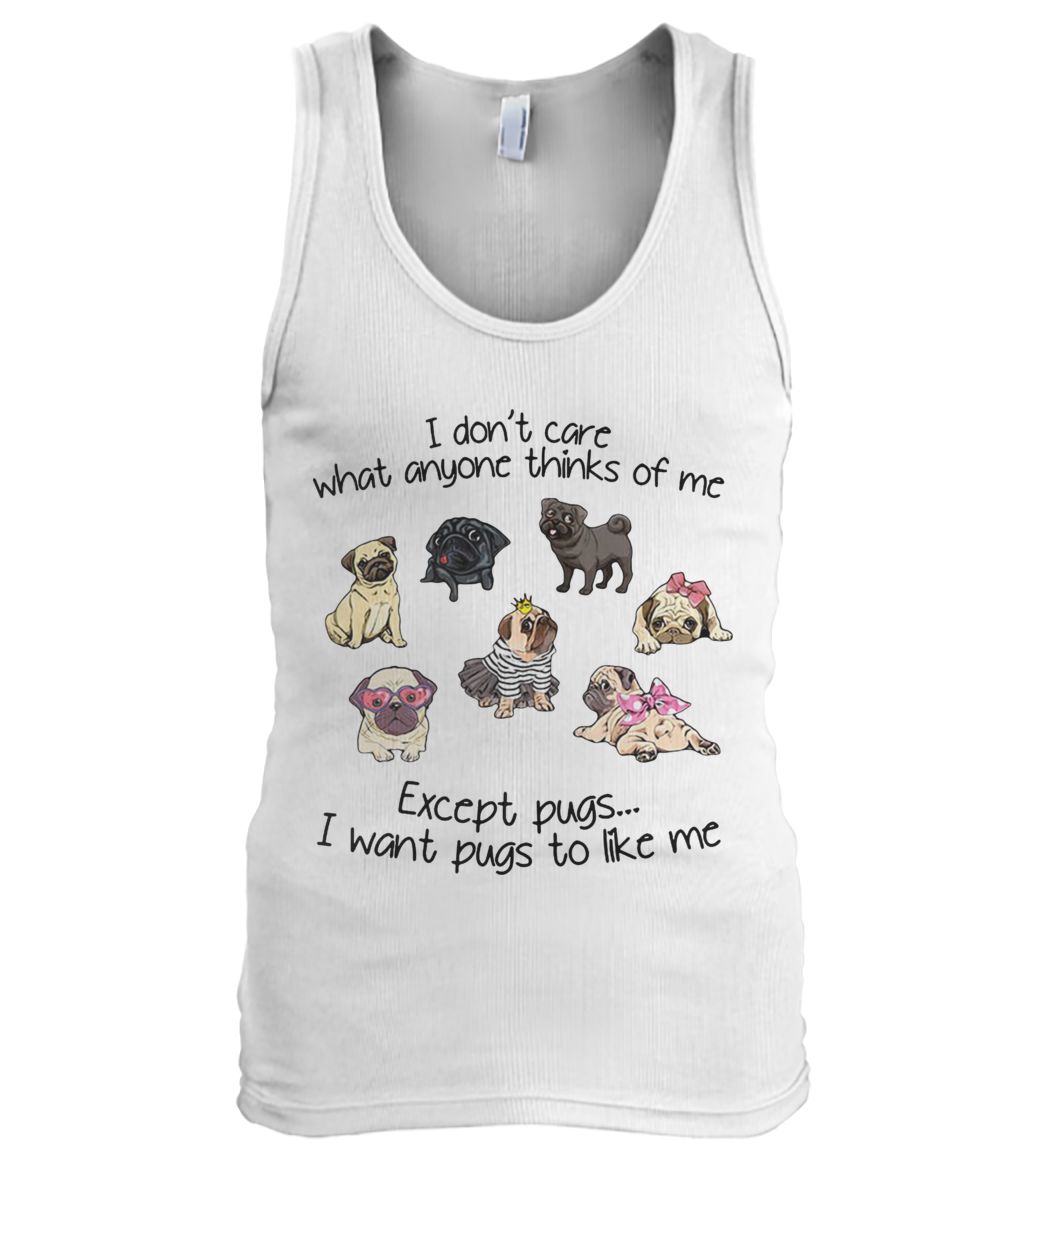 I don't care what anyone thinks of me excepts pugs I want pugs to like me men's tank top